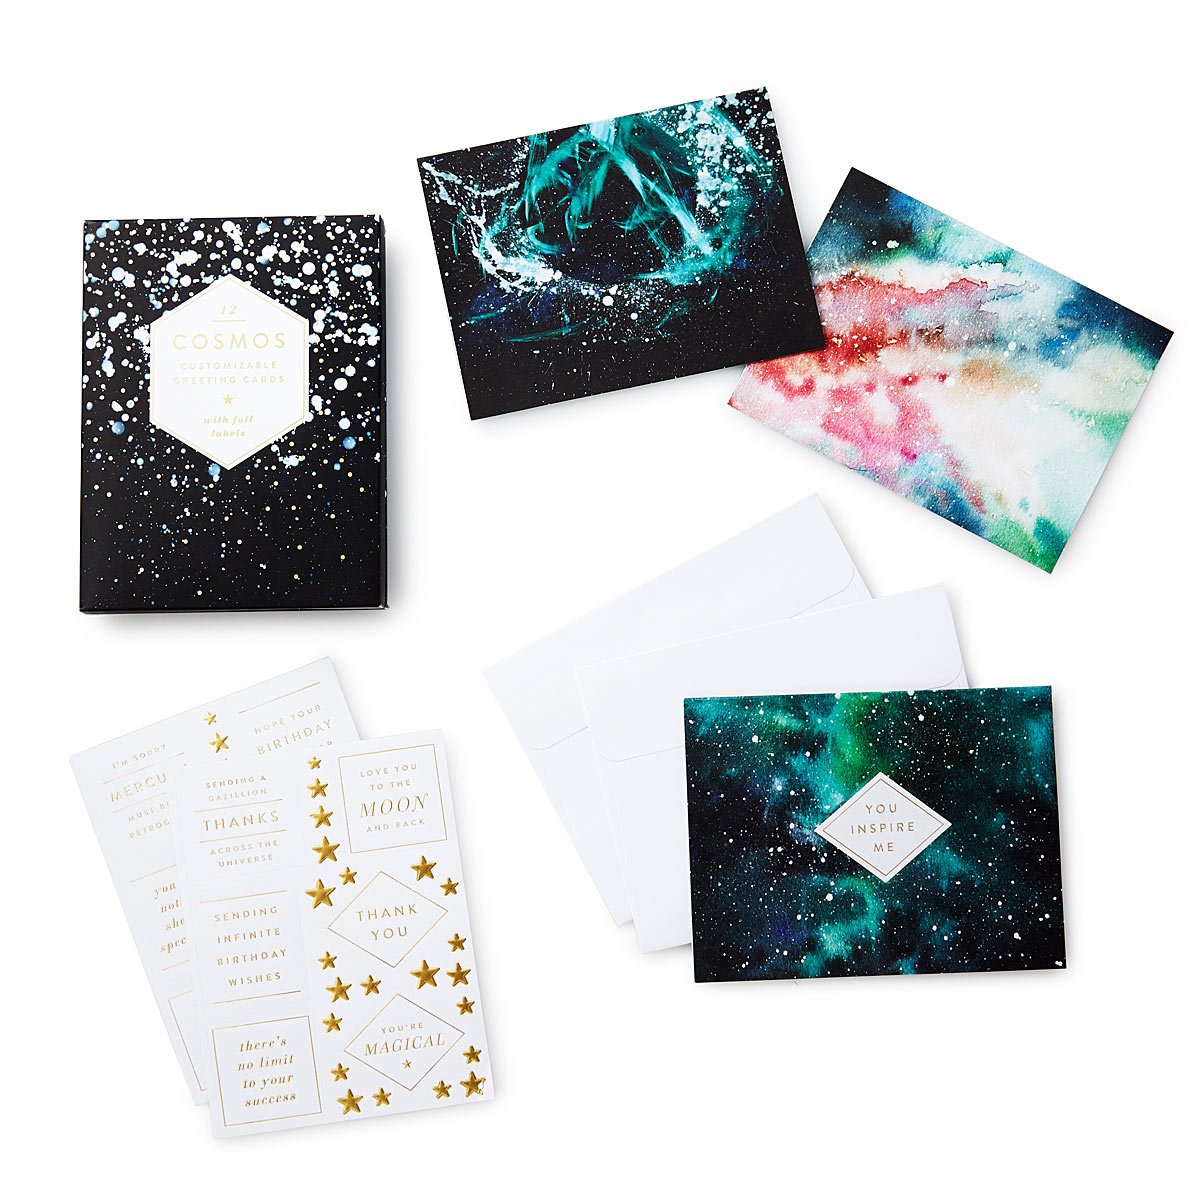 Cosmos Customizable Greeting Cards | UncommonGoods